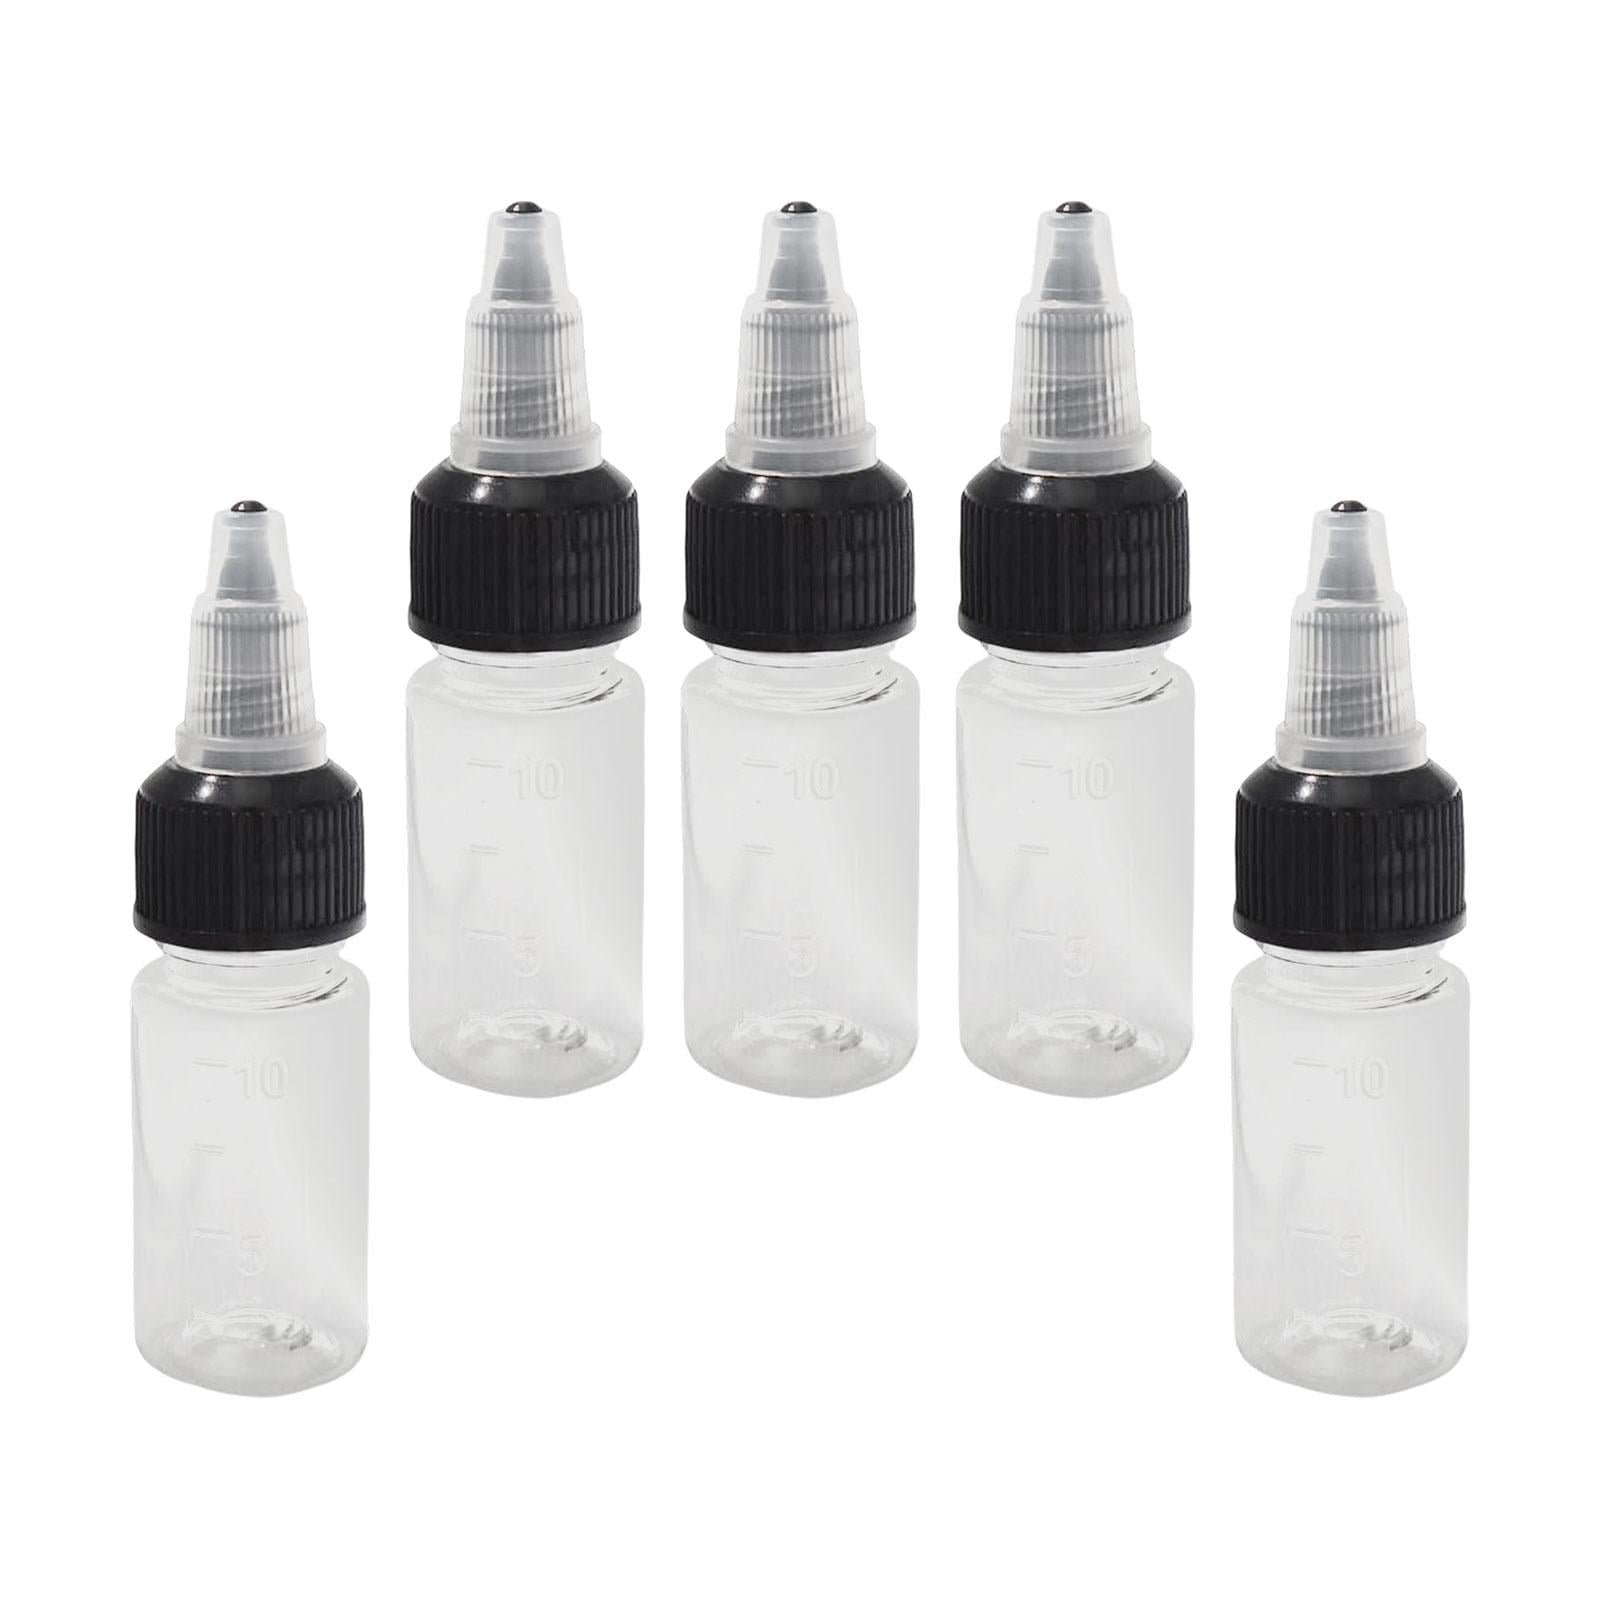 M01163 MOREZMORE 2 Steel Needle Tip 5 ml Dropper Squeeze Bottle